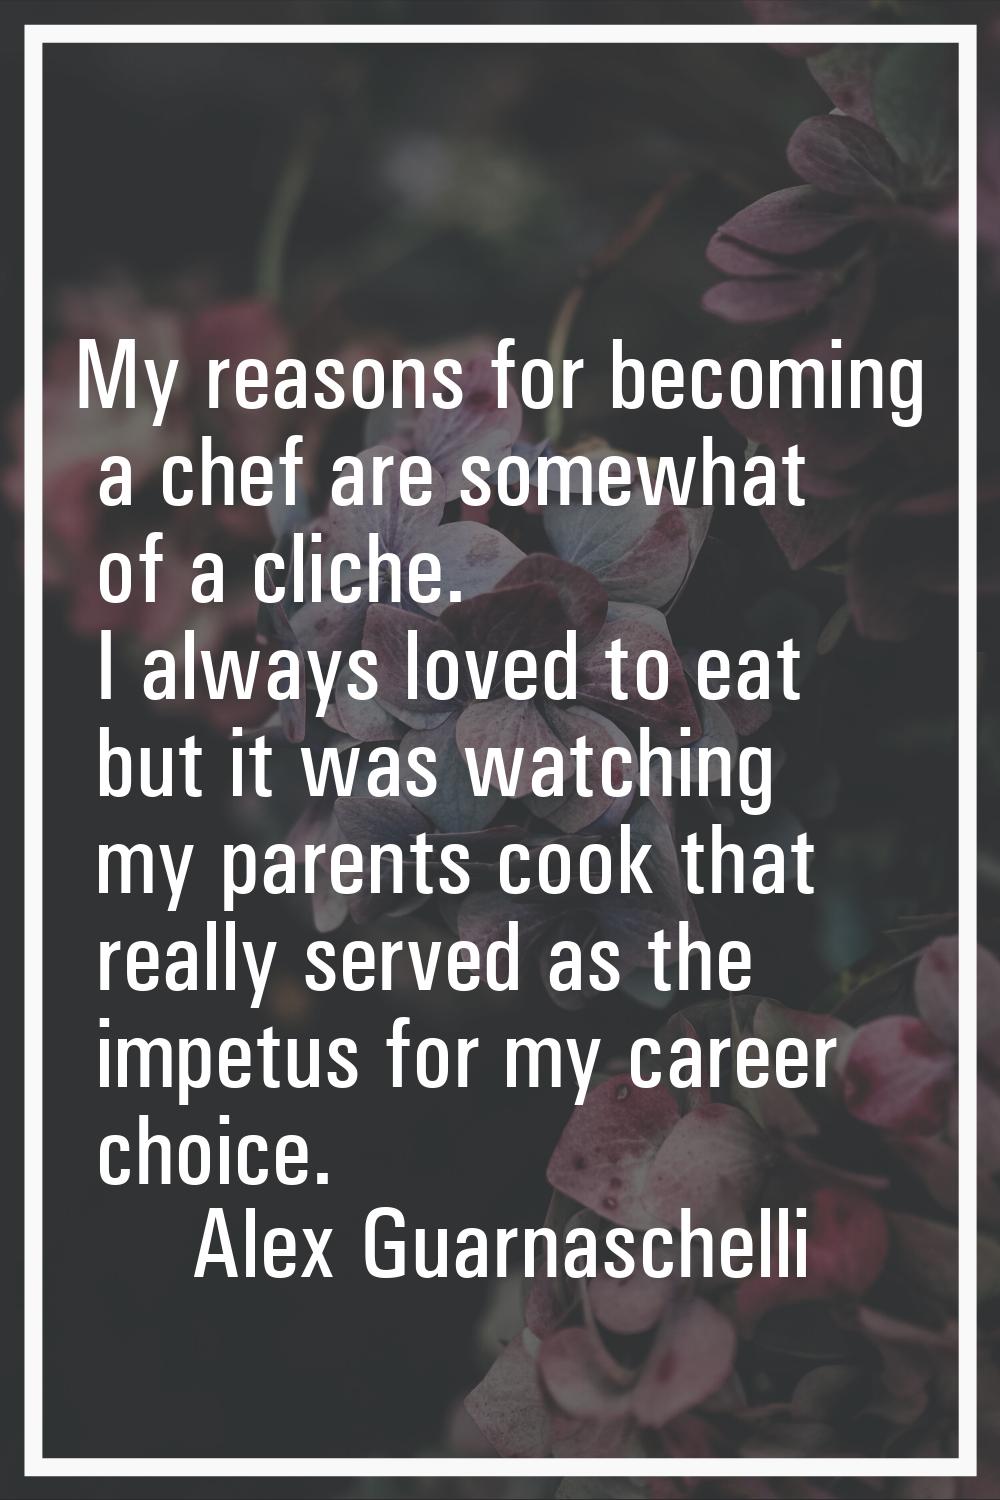 My reasons for becoming a chef are somewhat of a cliche. I always loved to eat but it was watching 